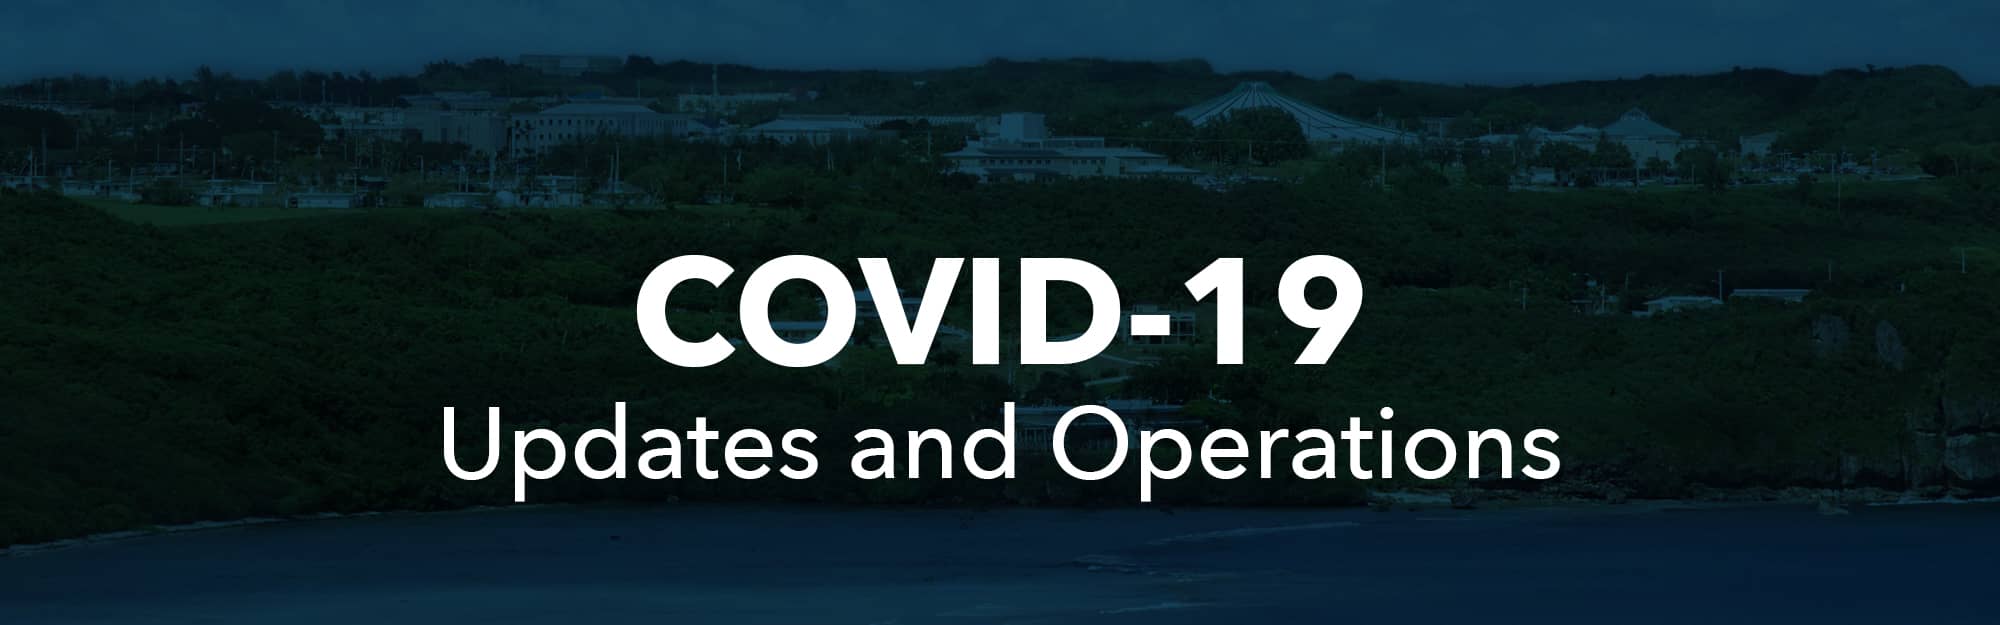 COVID-19 Updates and Operations